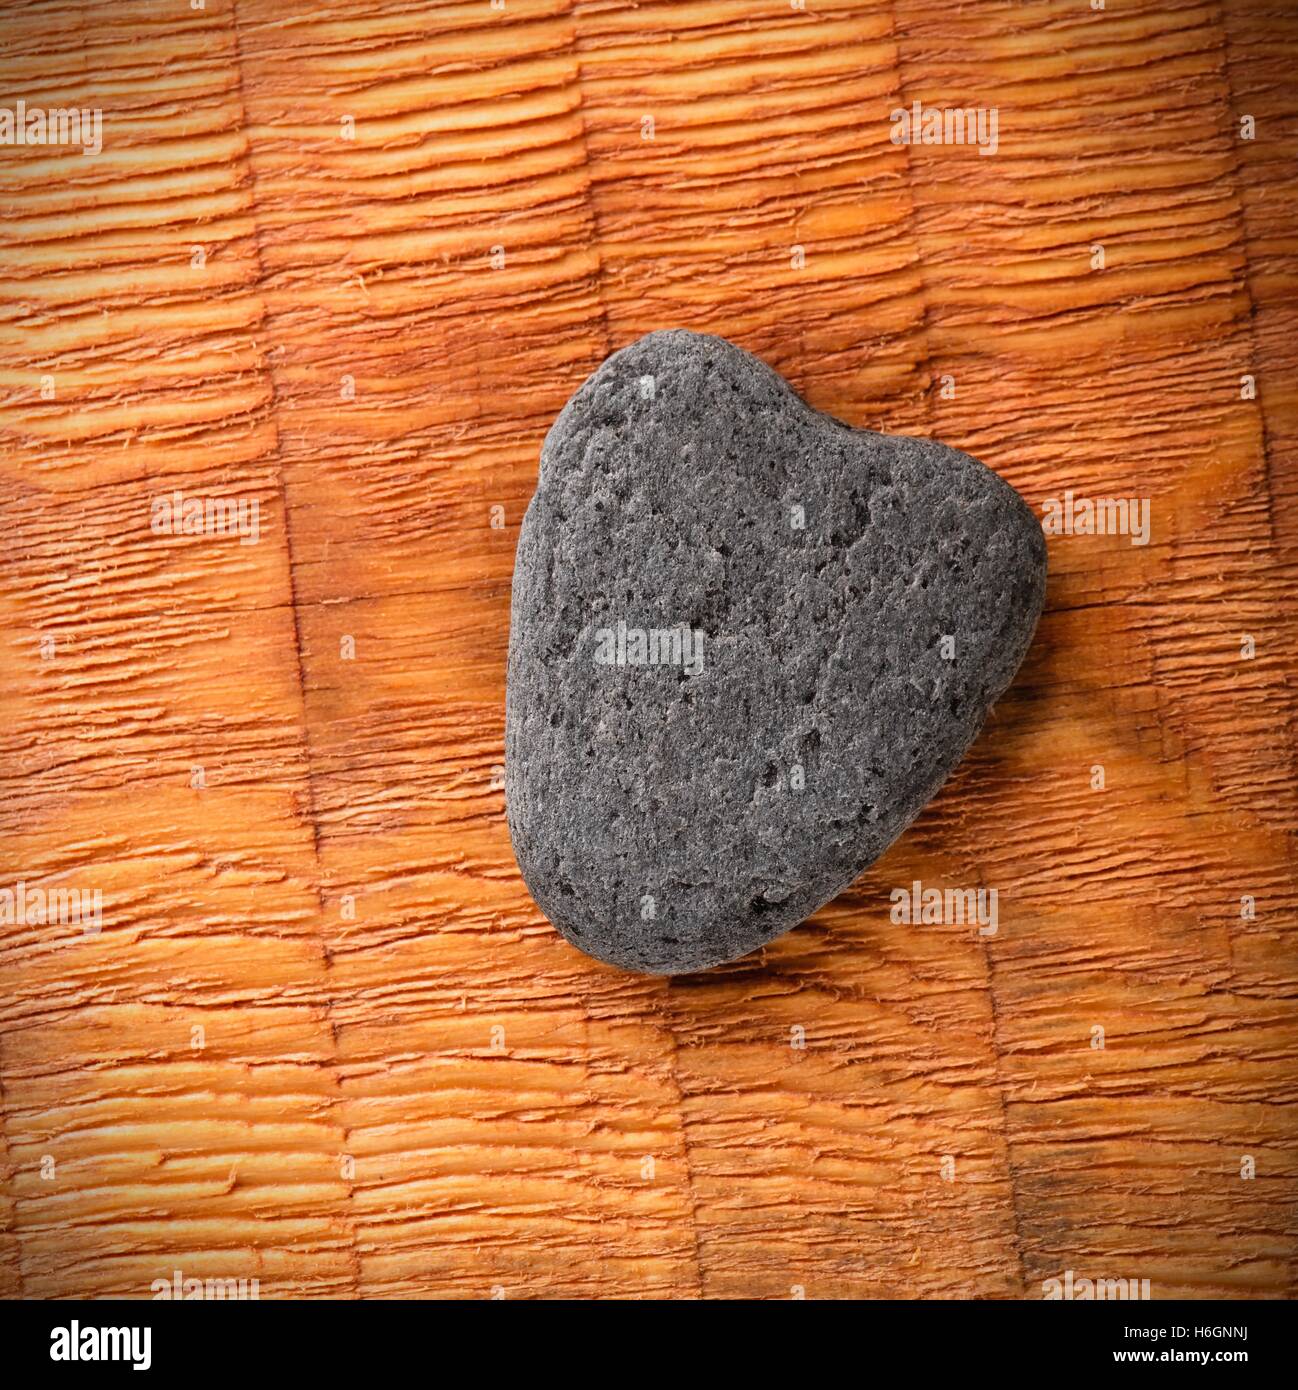 Square photo of slate grey stone with shape of heart. Heart shaped stone placed on wooden board with parallel grooves. Corners w Stock Photo